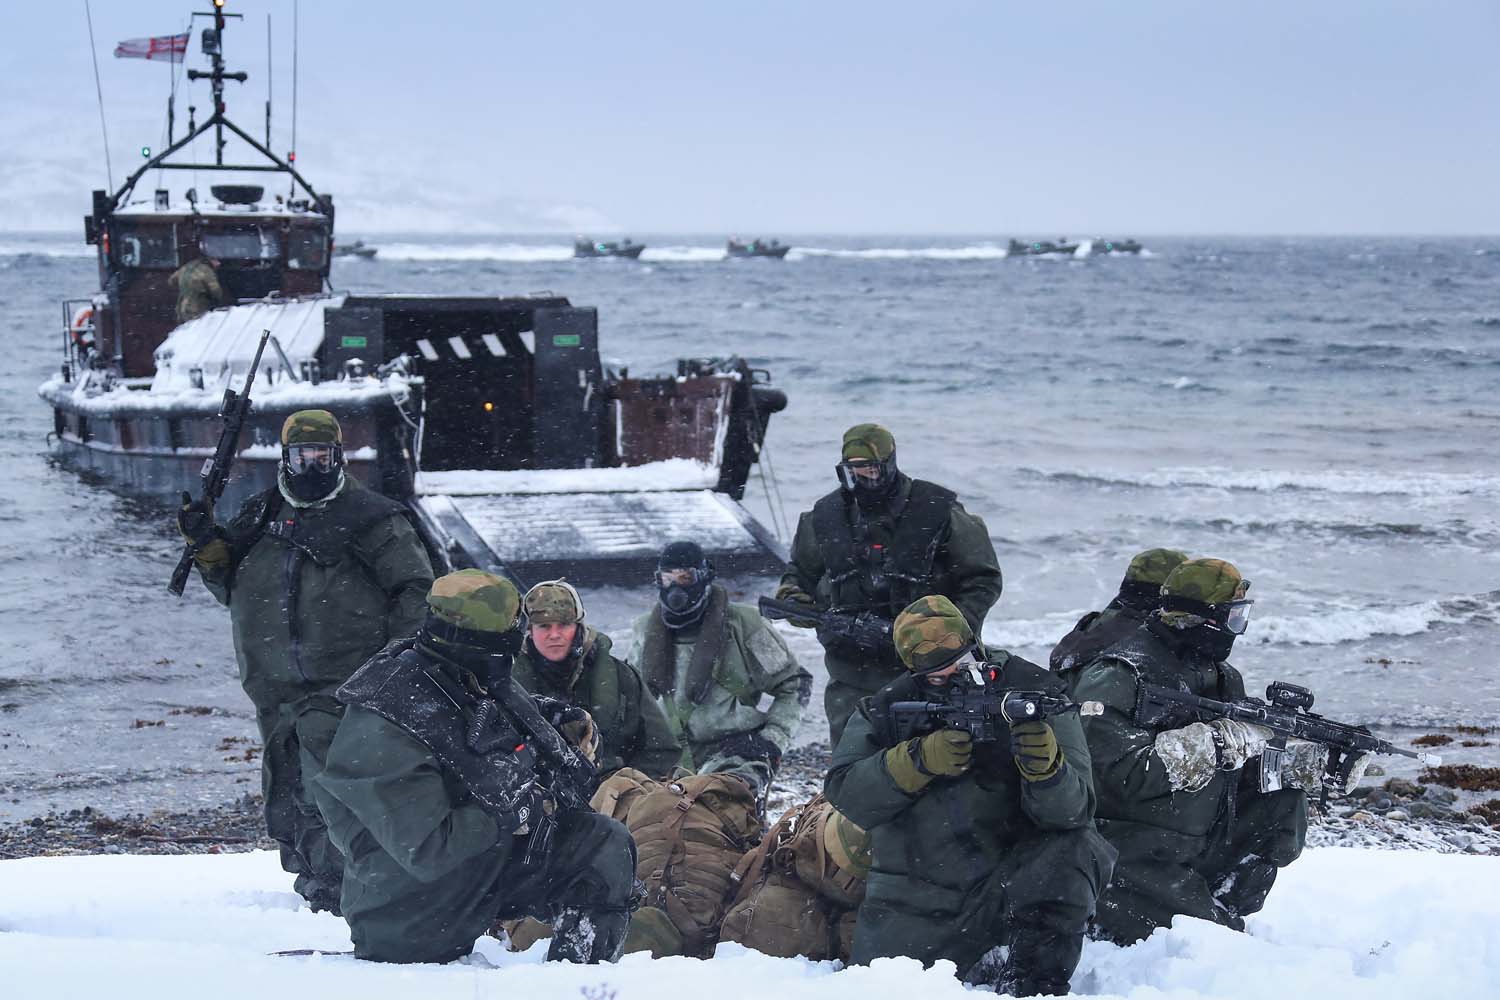  47 Cdo RM utilised Offshore Raiding Craft (ORCs) and Landing Craft Vehicle Personnel (LCVP) to show there Norwegian counterparts how they deliver troops and equipment ashore in the harsh Artic conditions.